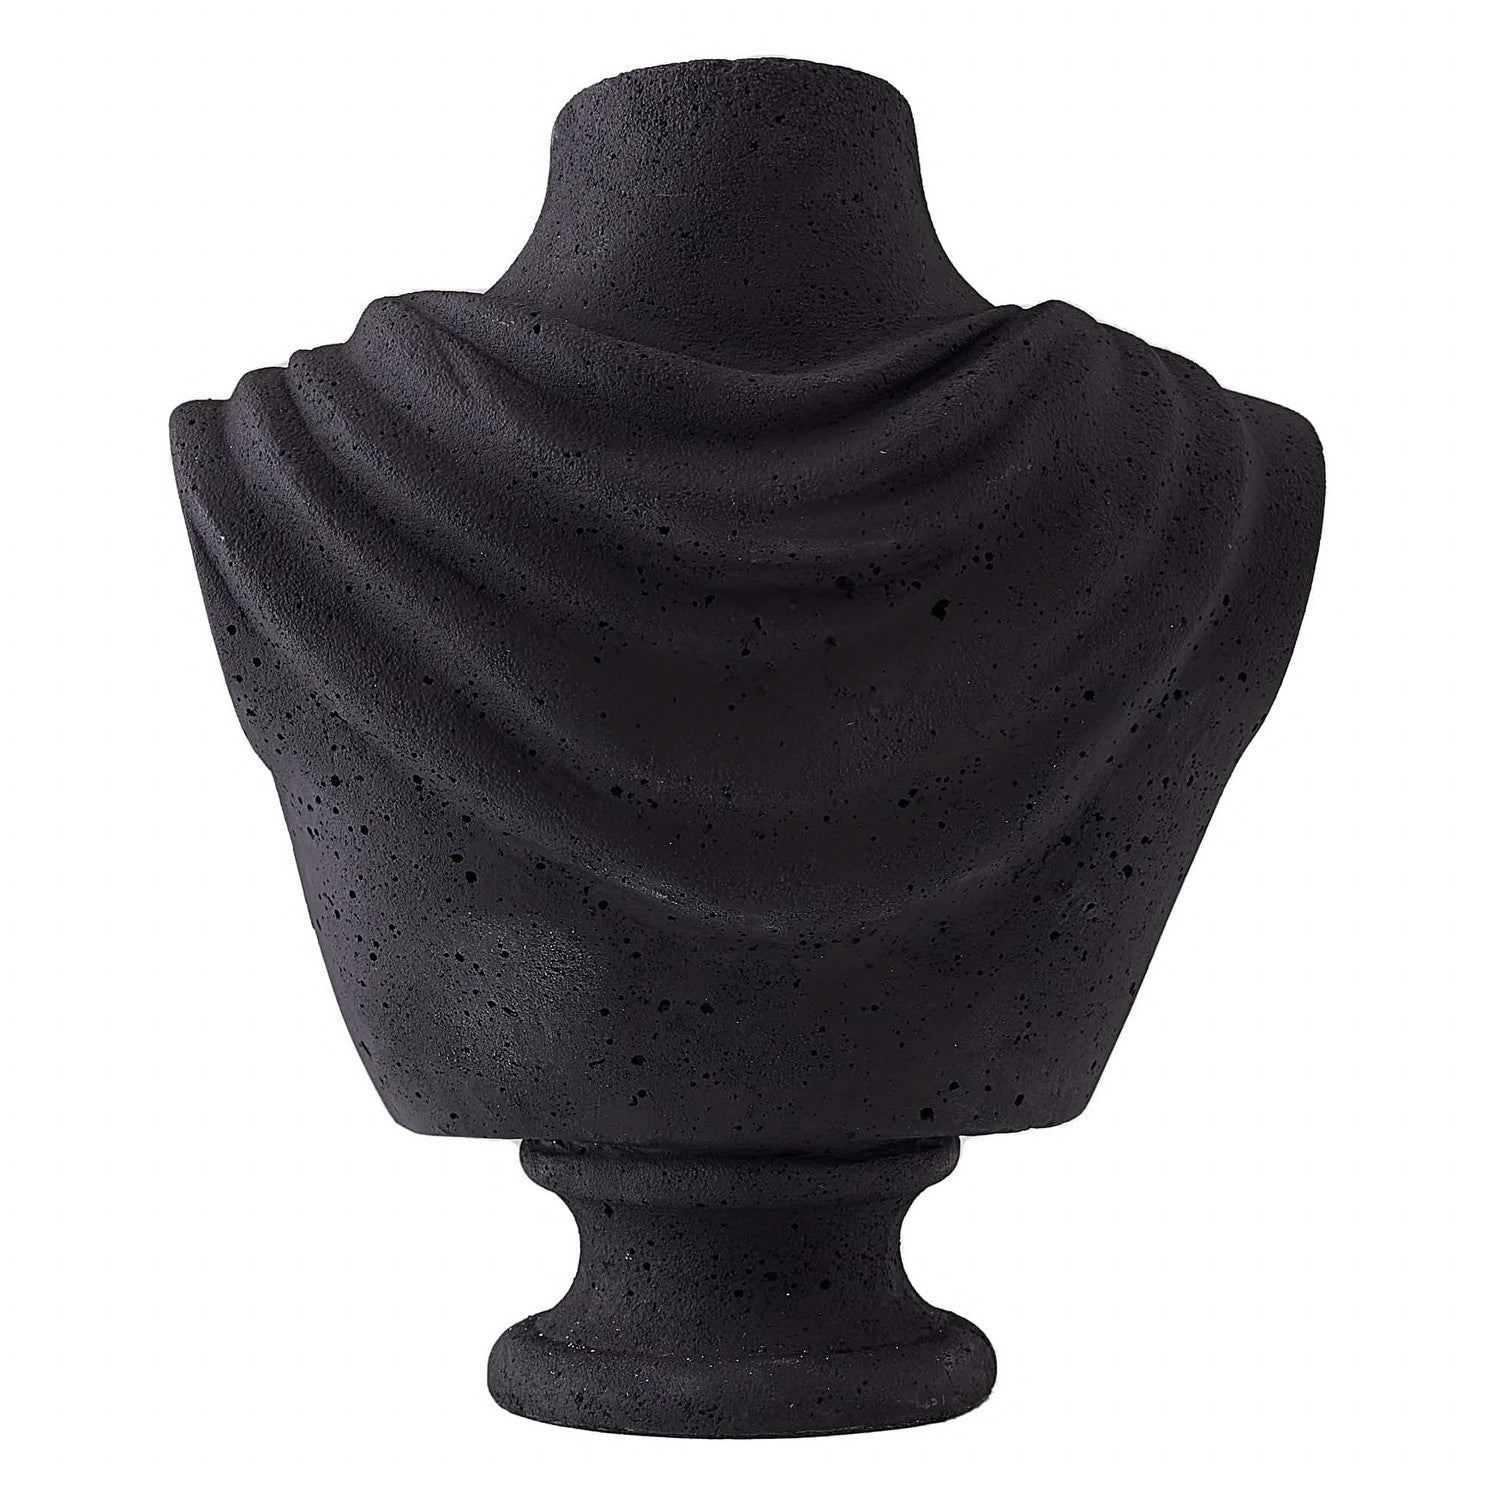 Sculpture from the Valhalla collection in Charcoal finish